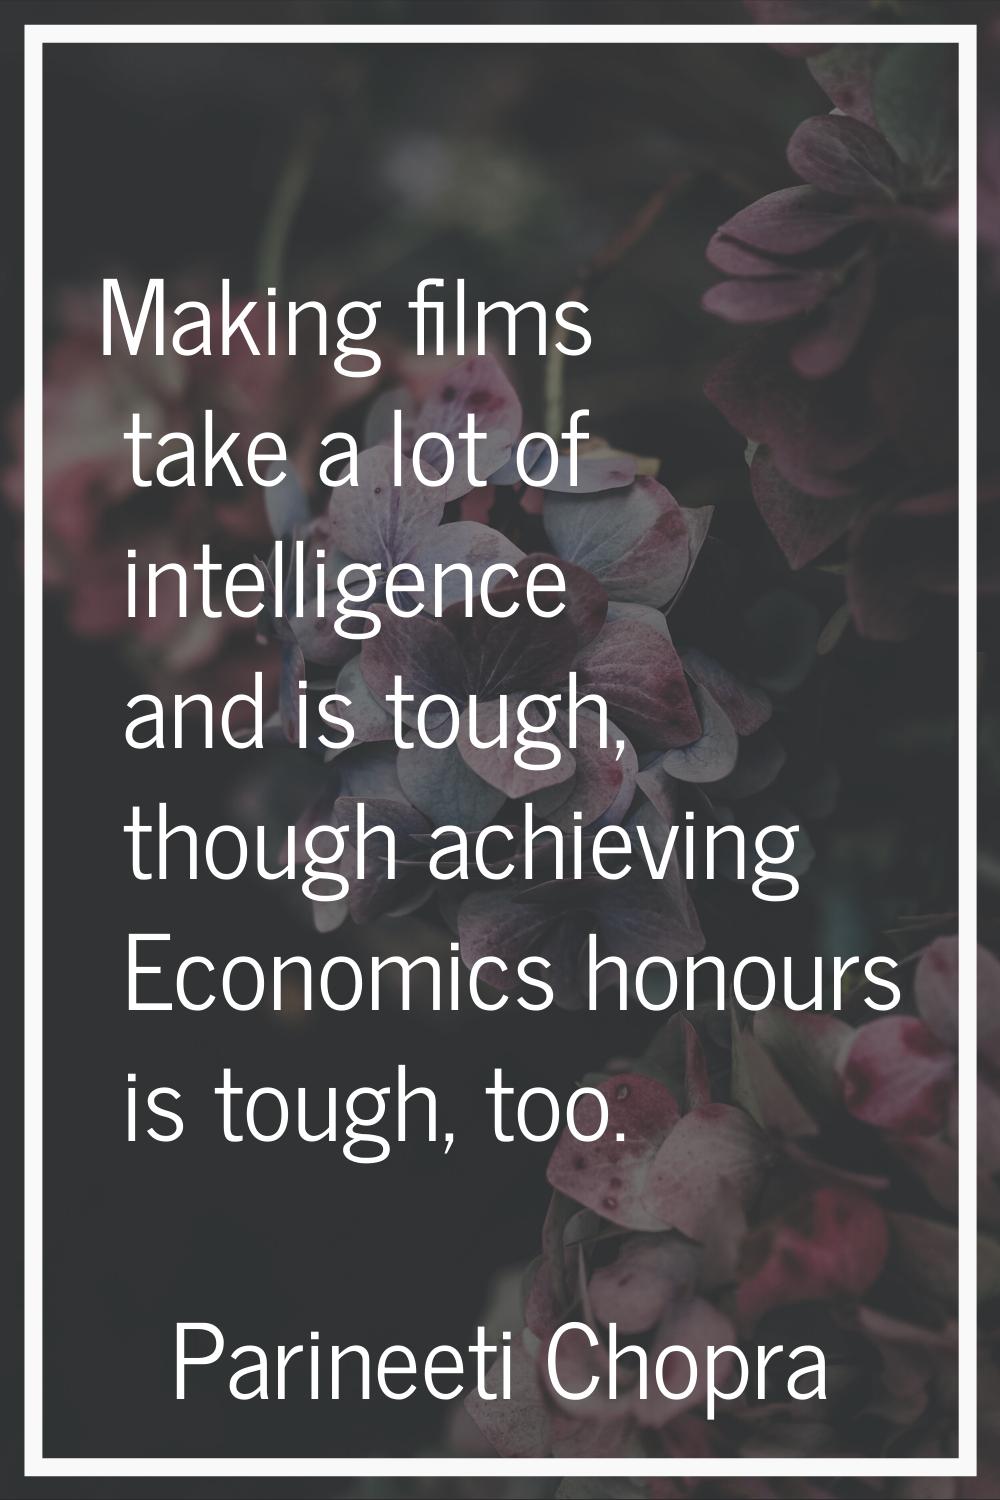 Making films take a lot of intelligence and is tough, though achieving Economics honours is tough, 